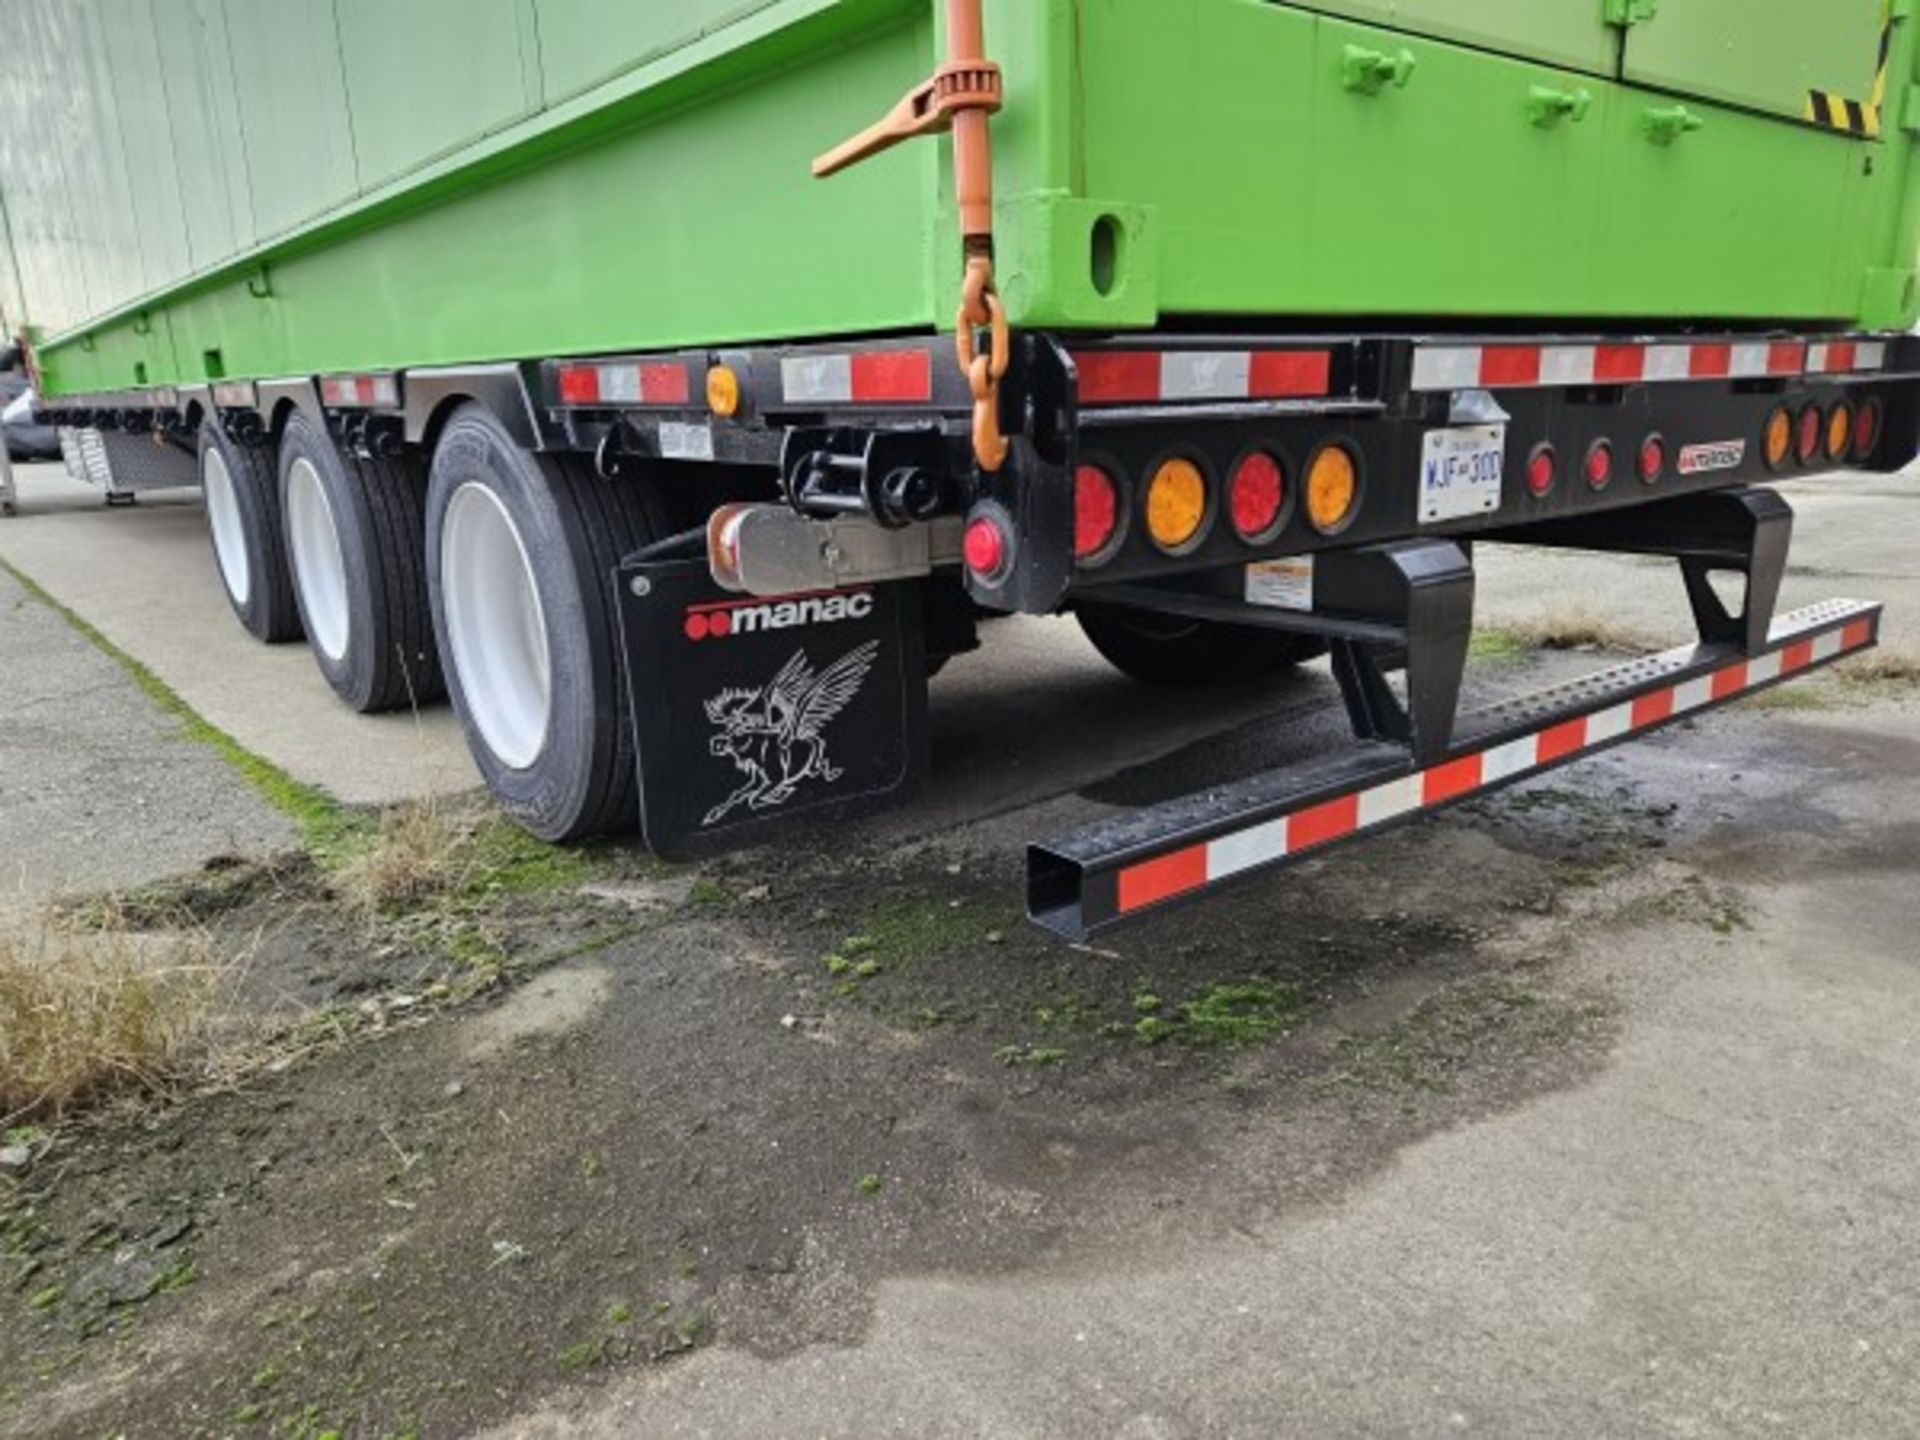 2022 MANAC 53 FT. STEP DECK STEEL TRAILER, TRI AXLE, MOD. 13353A000 S/N 2M5131617P1212652, See terms - Image 10 of 20